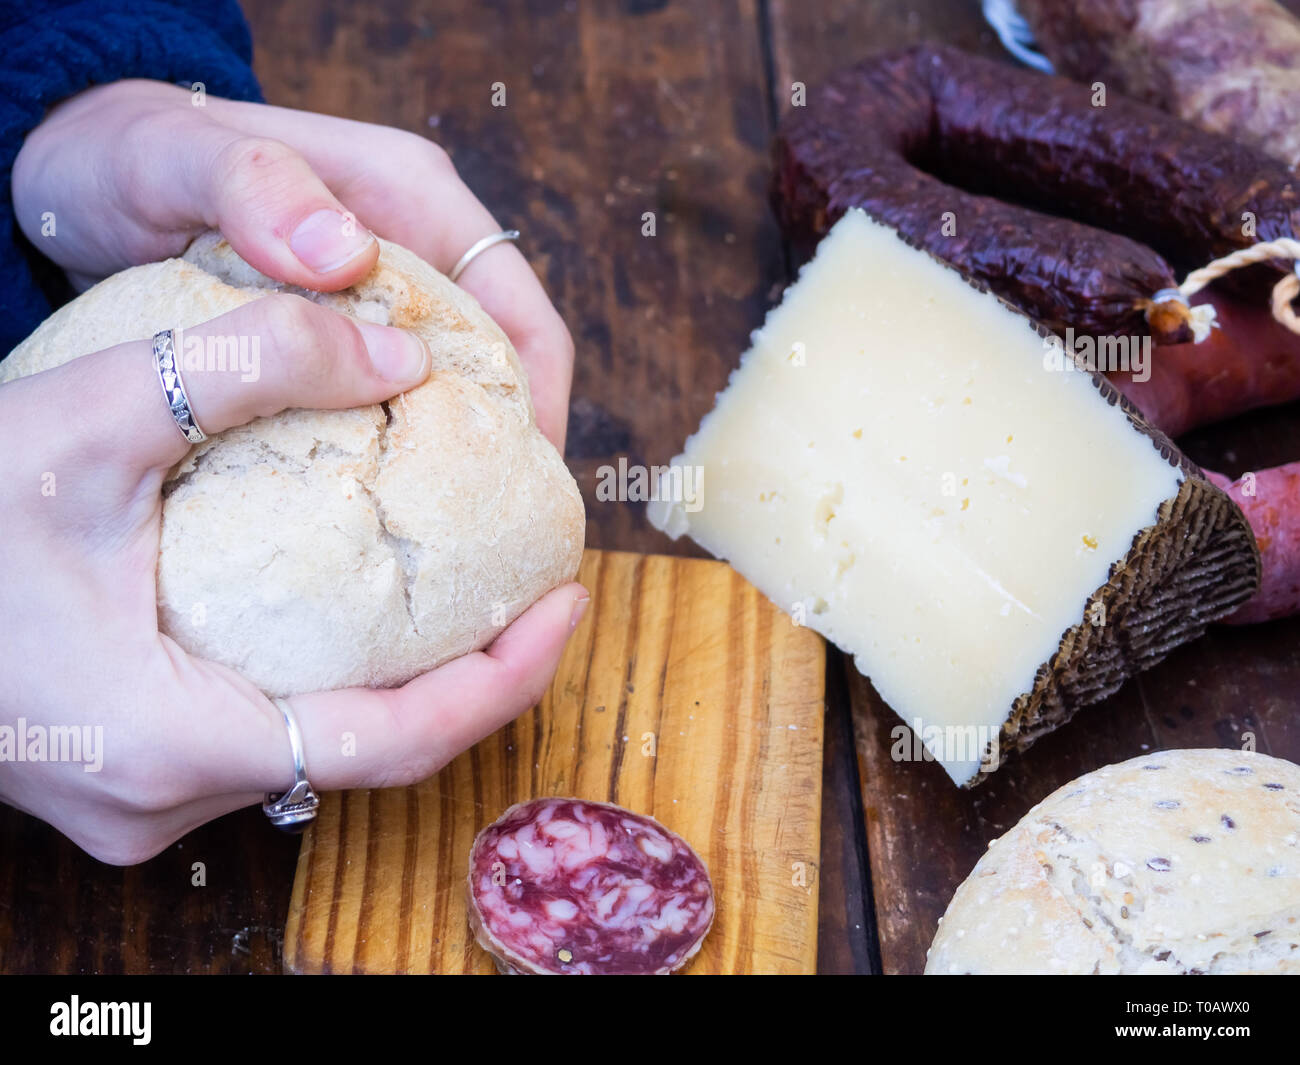 One person cutting rustic bread and Iberian pork sausage and a wedge of sheep cheese on an old wooden board Stock Photo